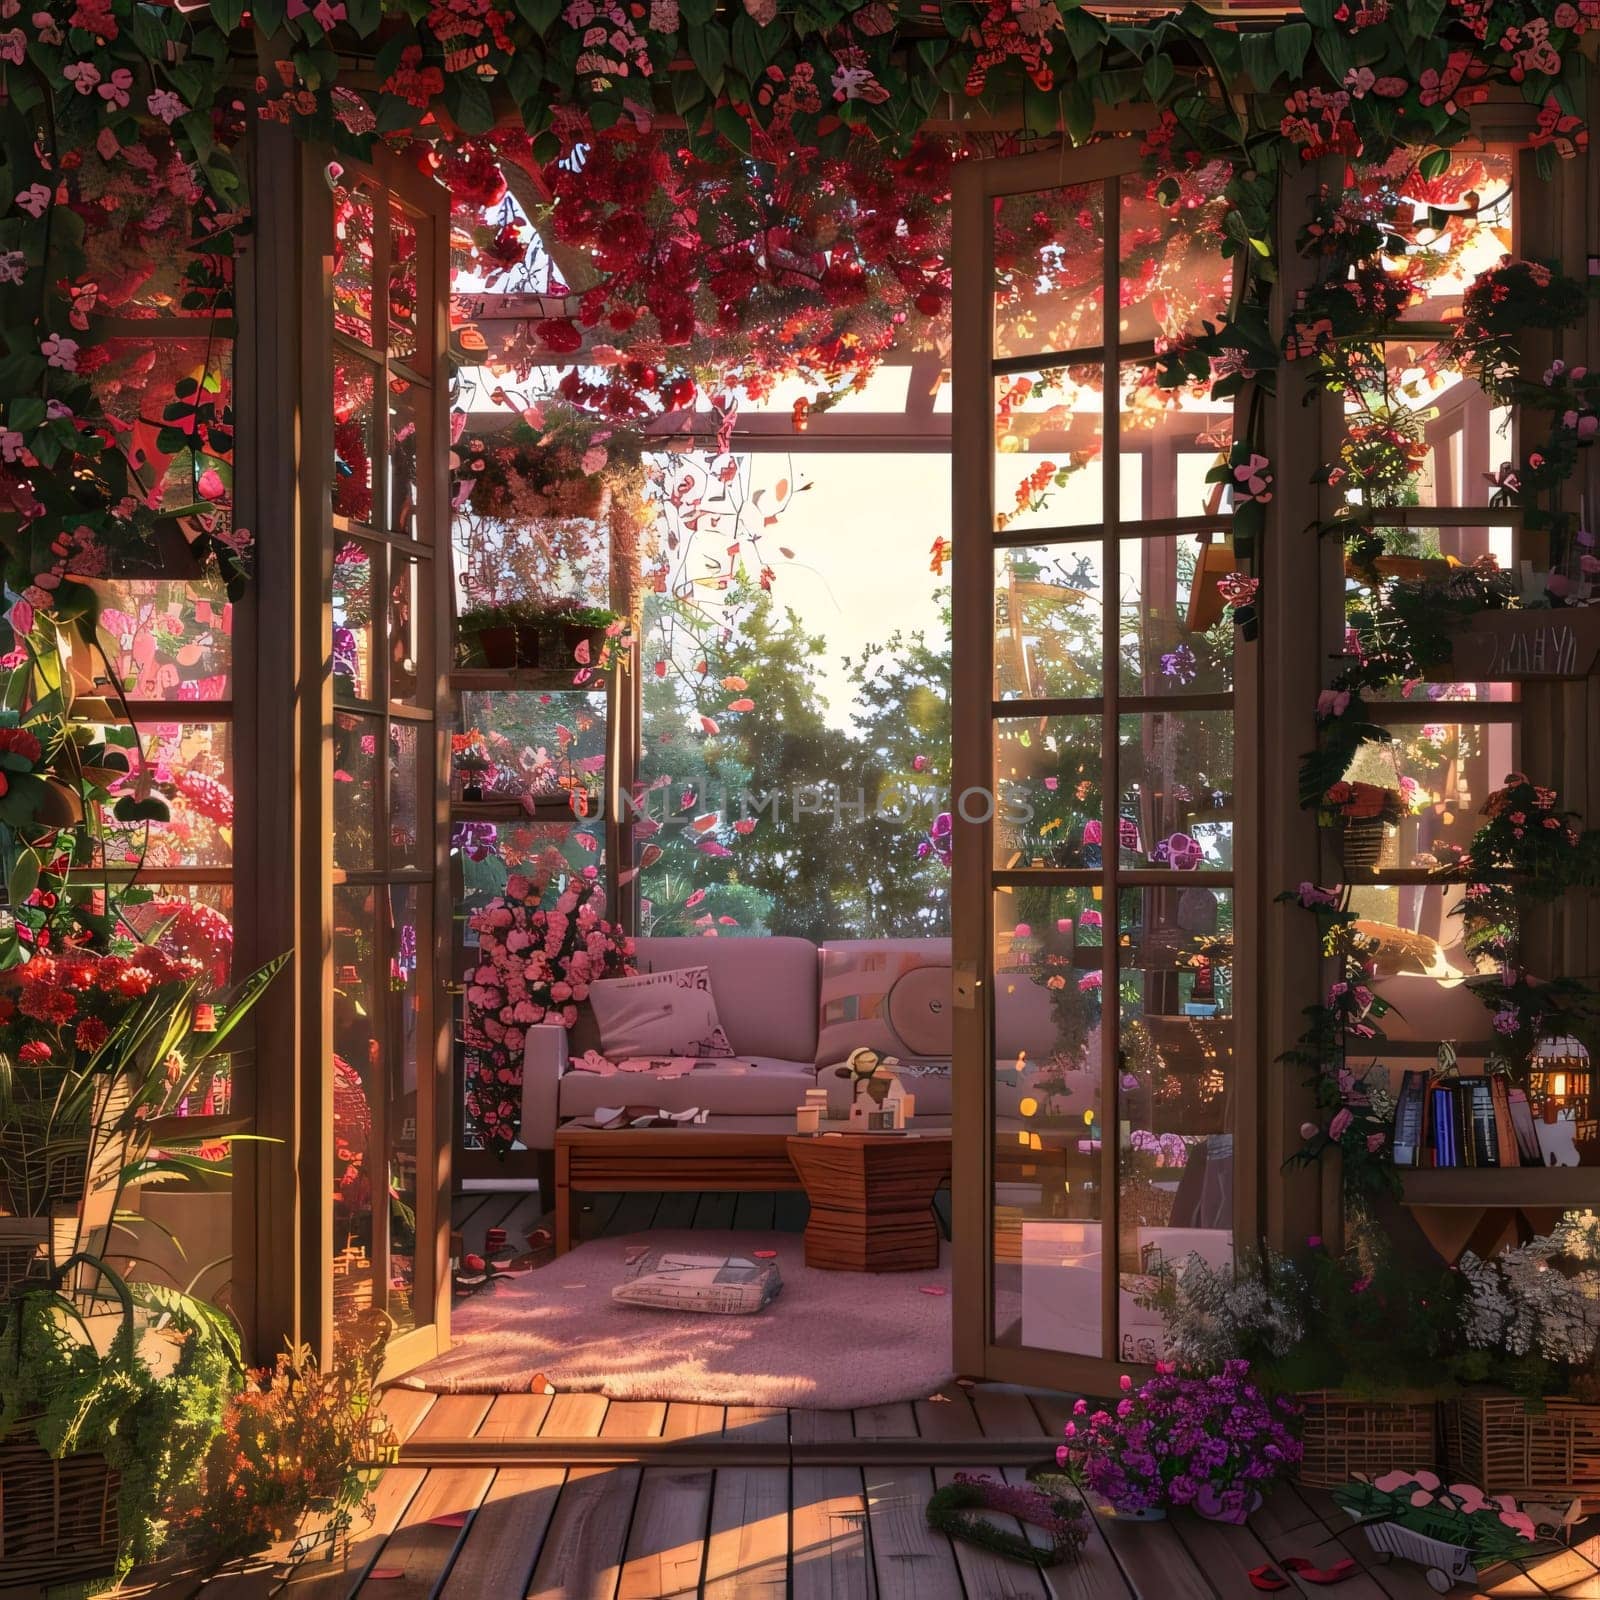 Decorated with colorful pink red flowers exit to the terrace, wooden house glass, door windows. Flowering flowers, a symbol of spring, new life. A joyful time of nature awakening to life.